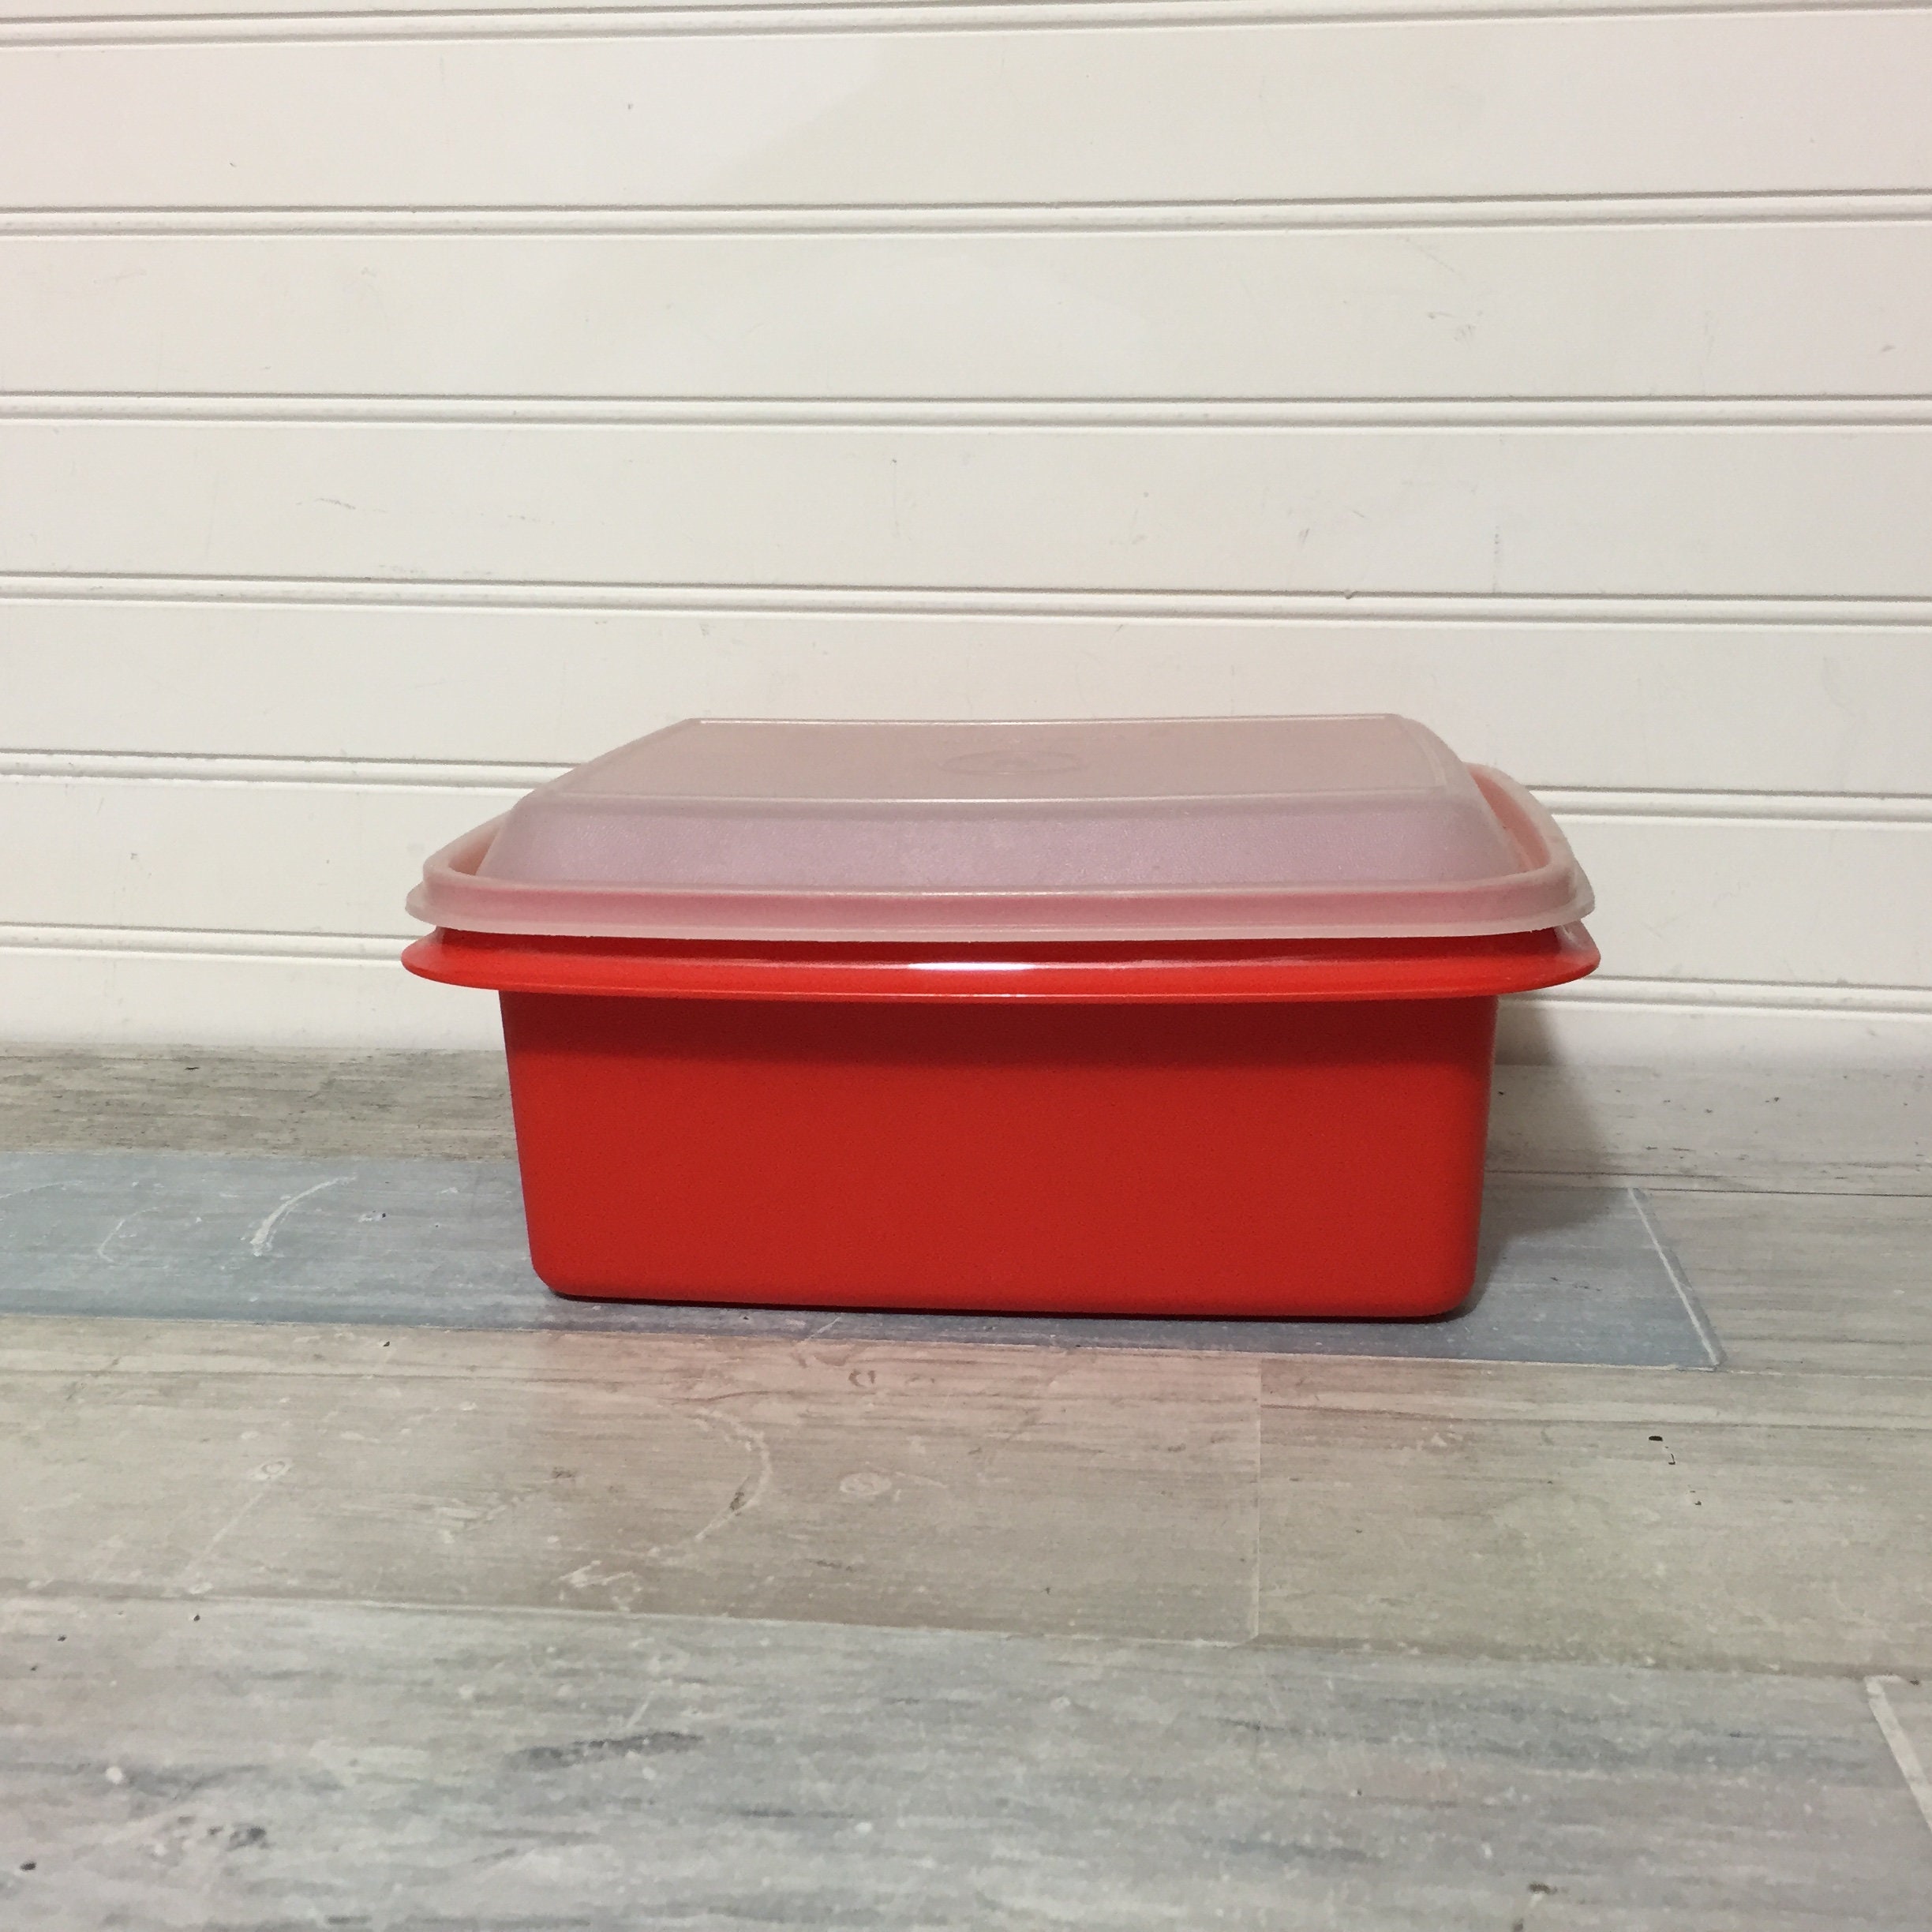 Tupperware Pack-N-Carry Lunch Box Set w/Handle, Lid & 2 Containers -  Paprika